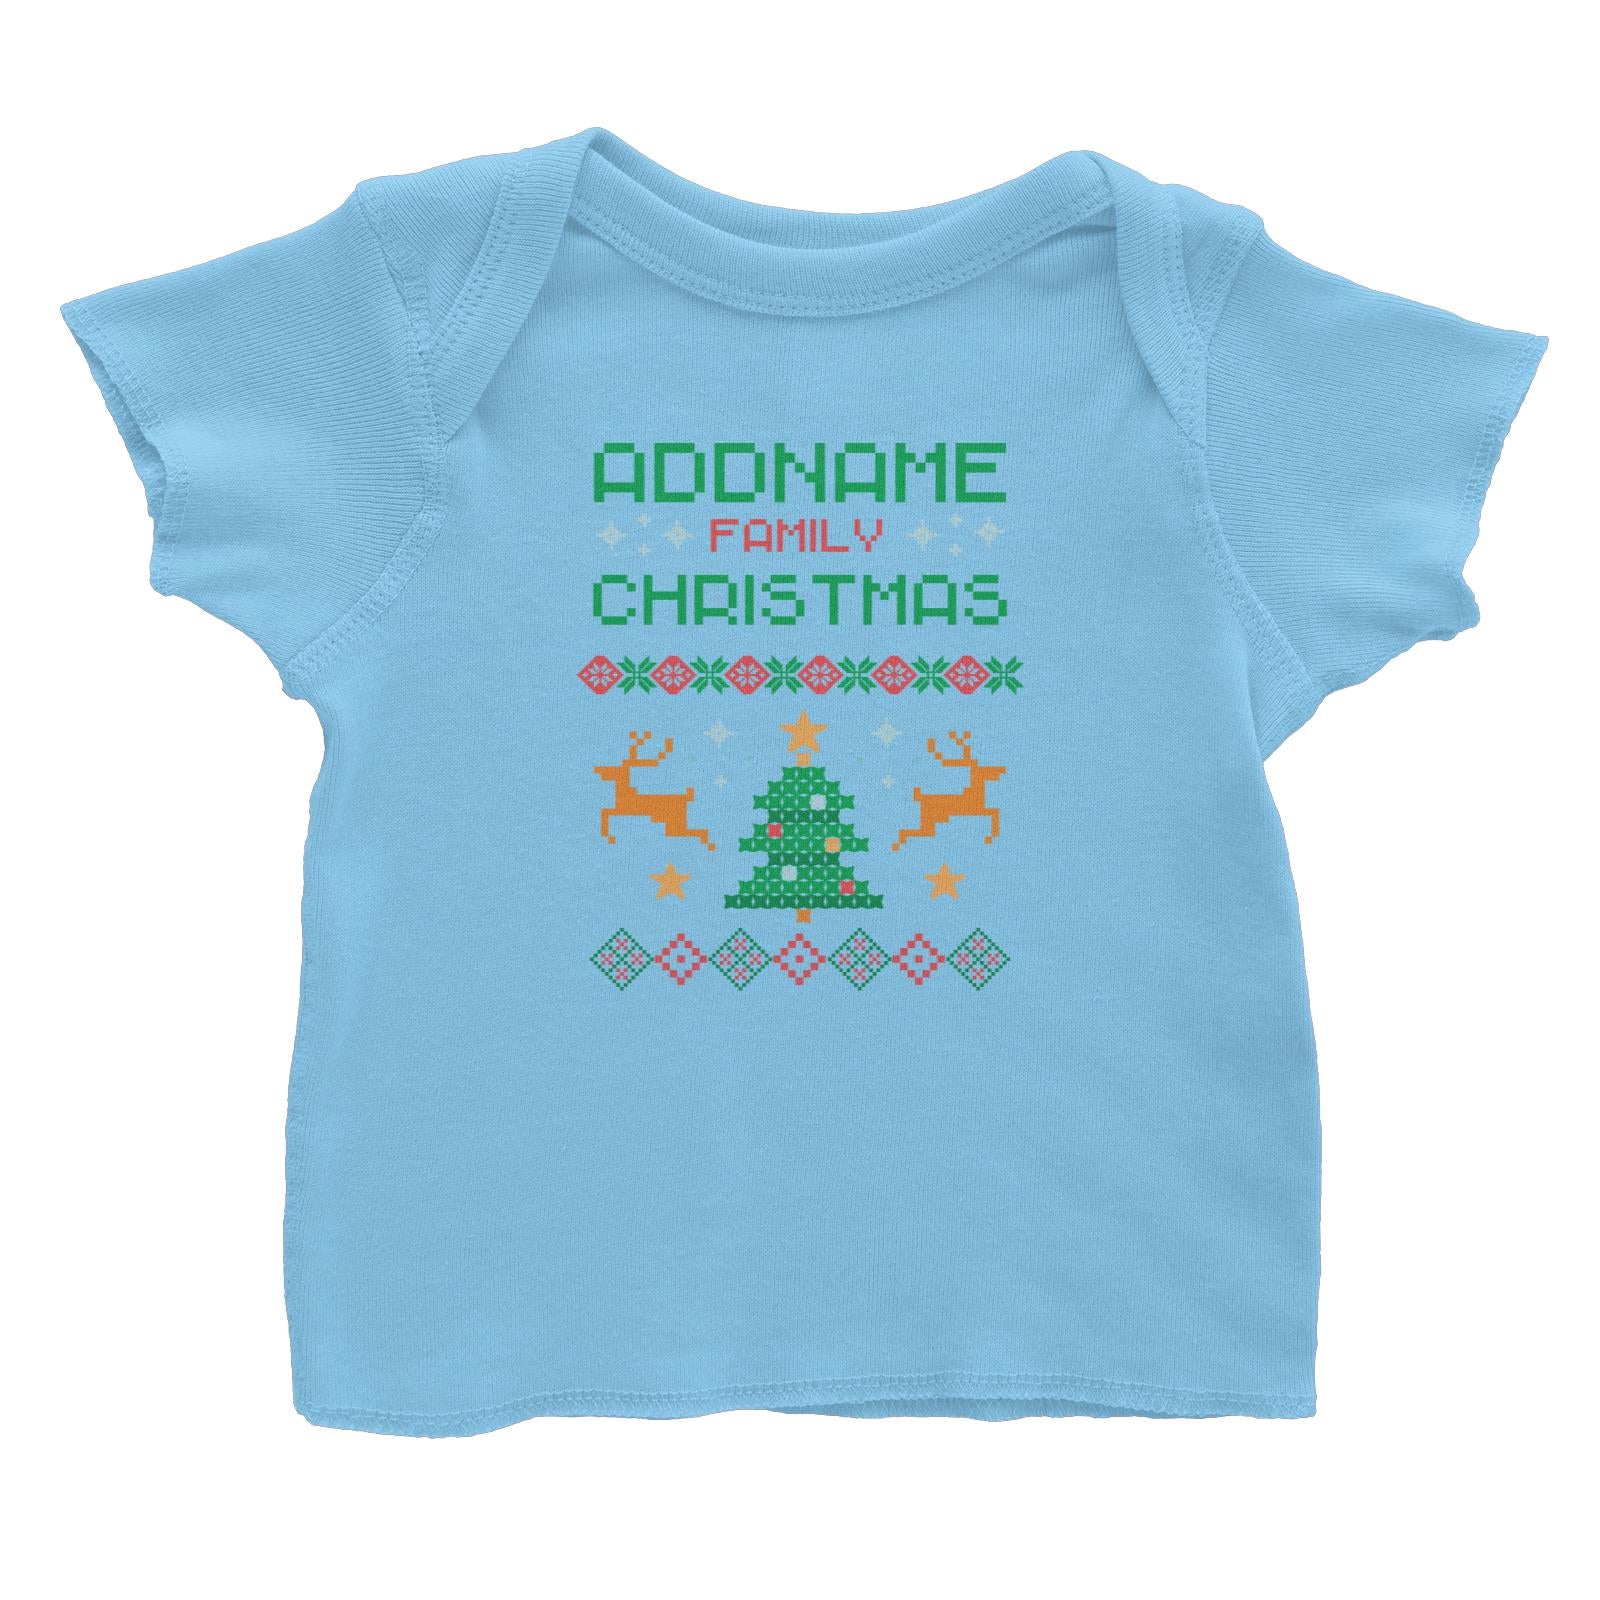 Christmas Series Addname Family Sweater Design Baby T-Shirt